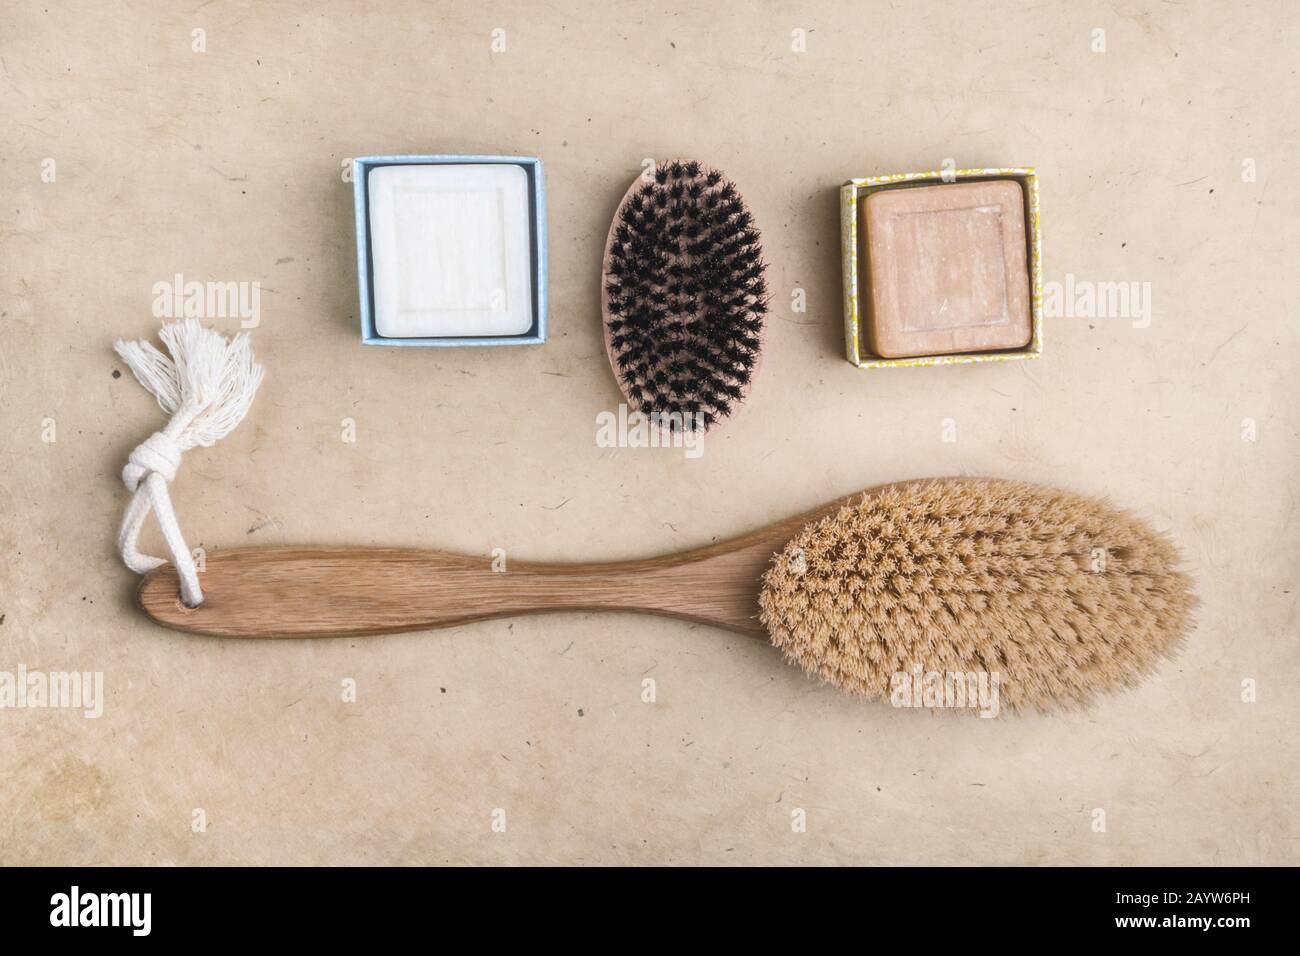 Beauty and skin care. Closeup spa products bath accessories scrub brush, homemade soap on wooden table. Stock Photo